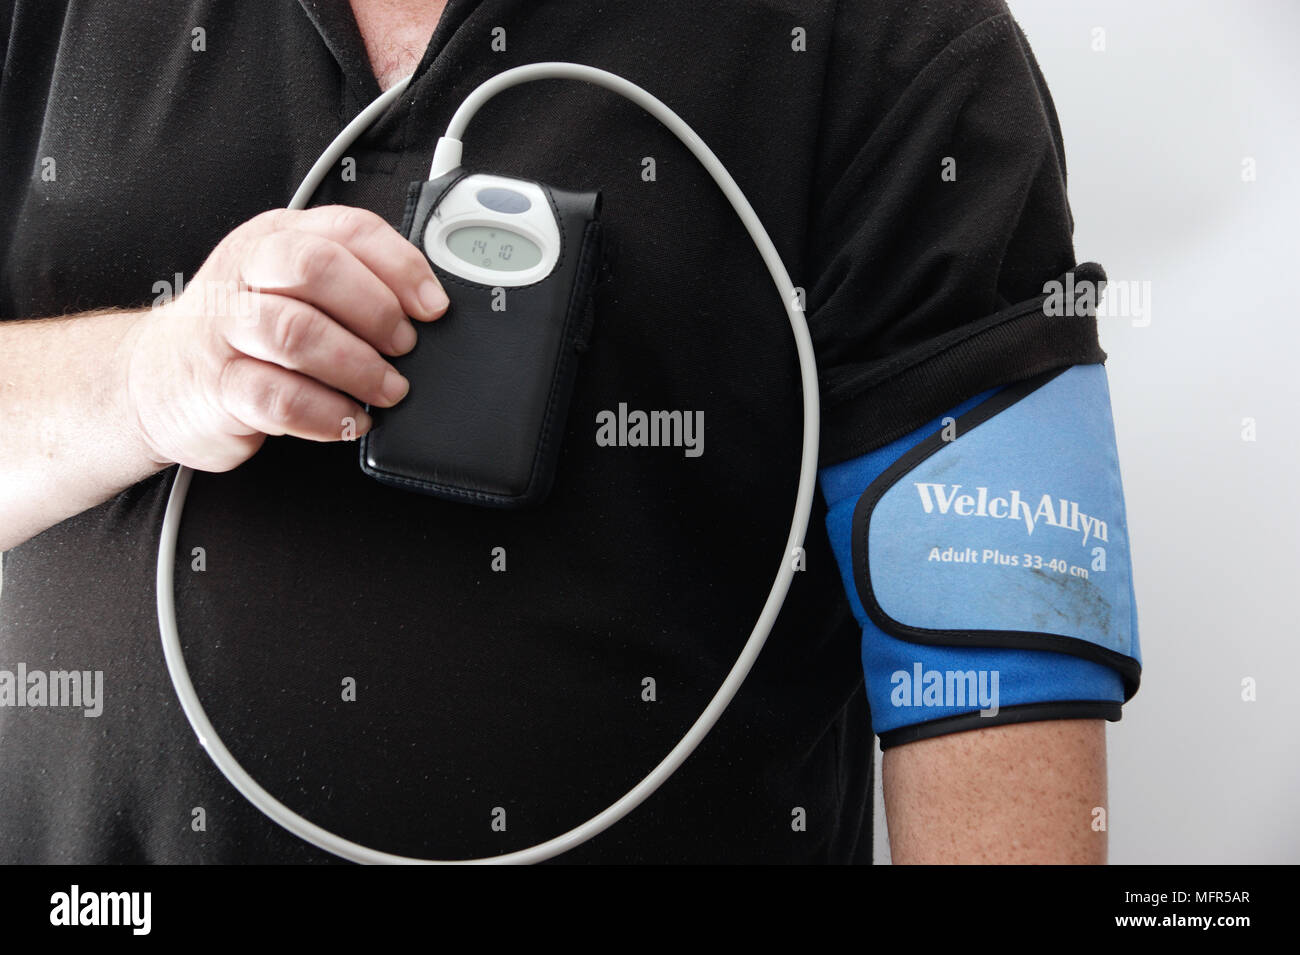 https://c8.alamy.com/comp/MFR5AR/24-hour-blood-pressure-monitoring-unit-taking-readings-every-half-an-hour-on-a-middle-aged-man-model-release-MFR5AR.jpg